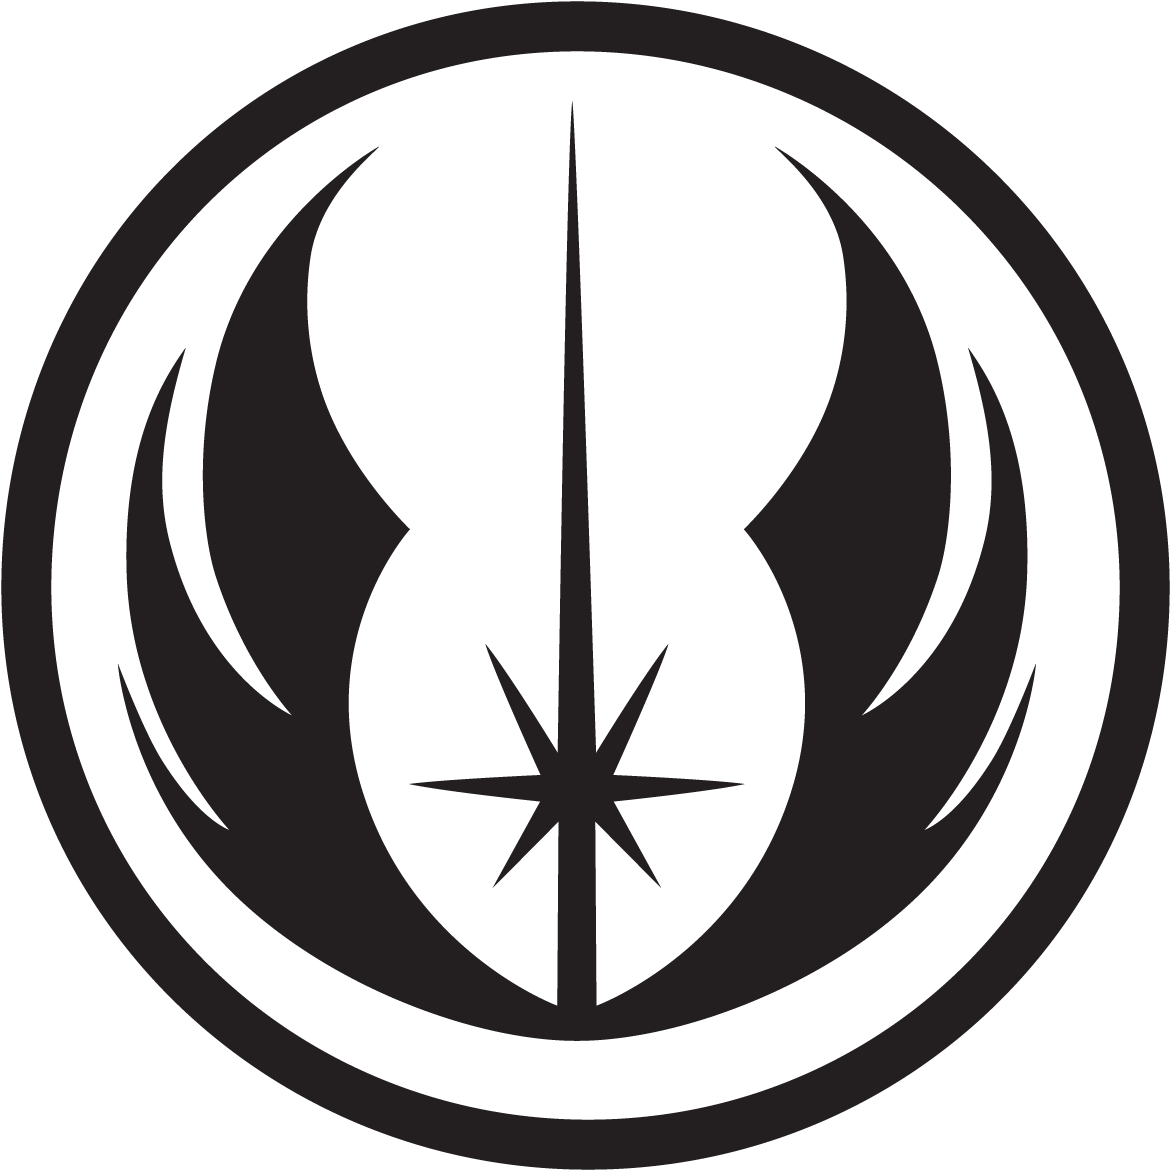 Star Wars, The Gist Of It - Jedi Order Logo Png (1185x1185)